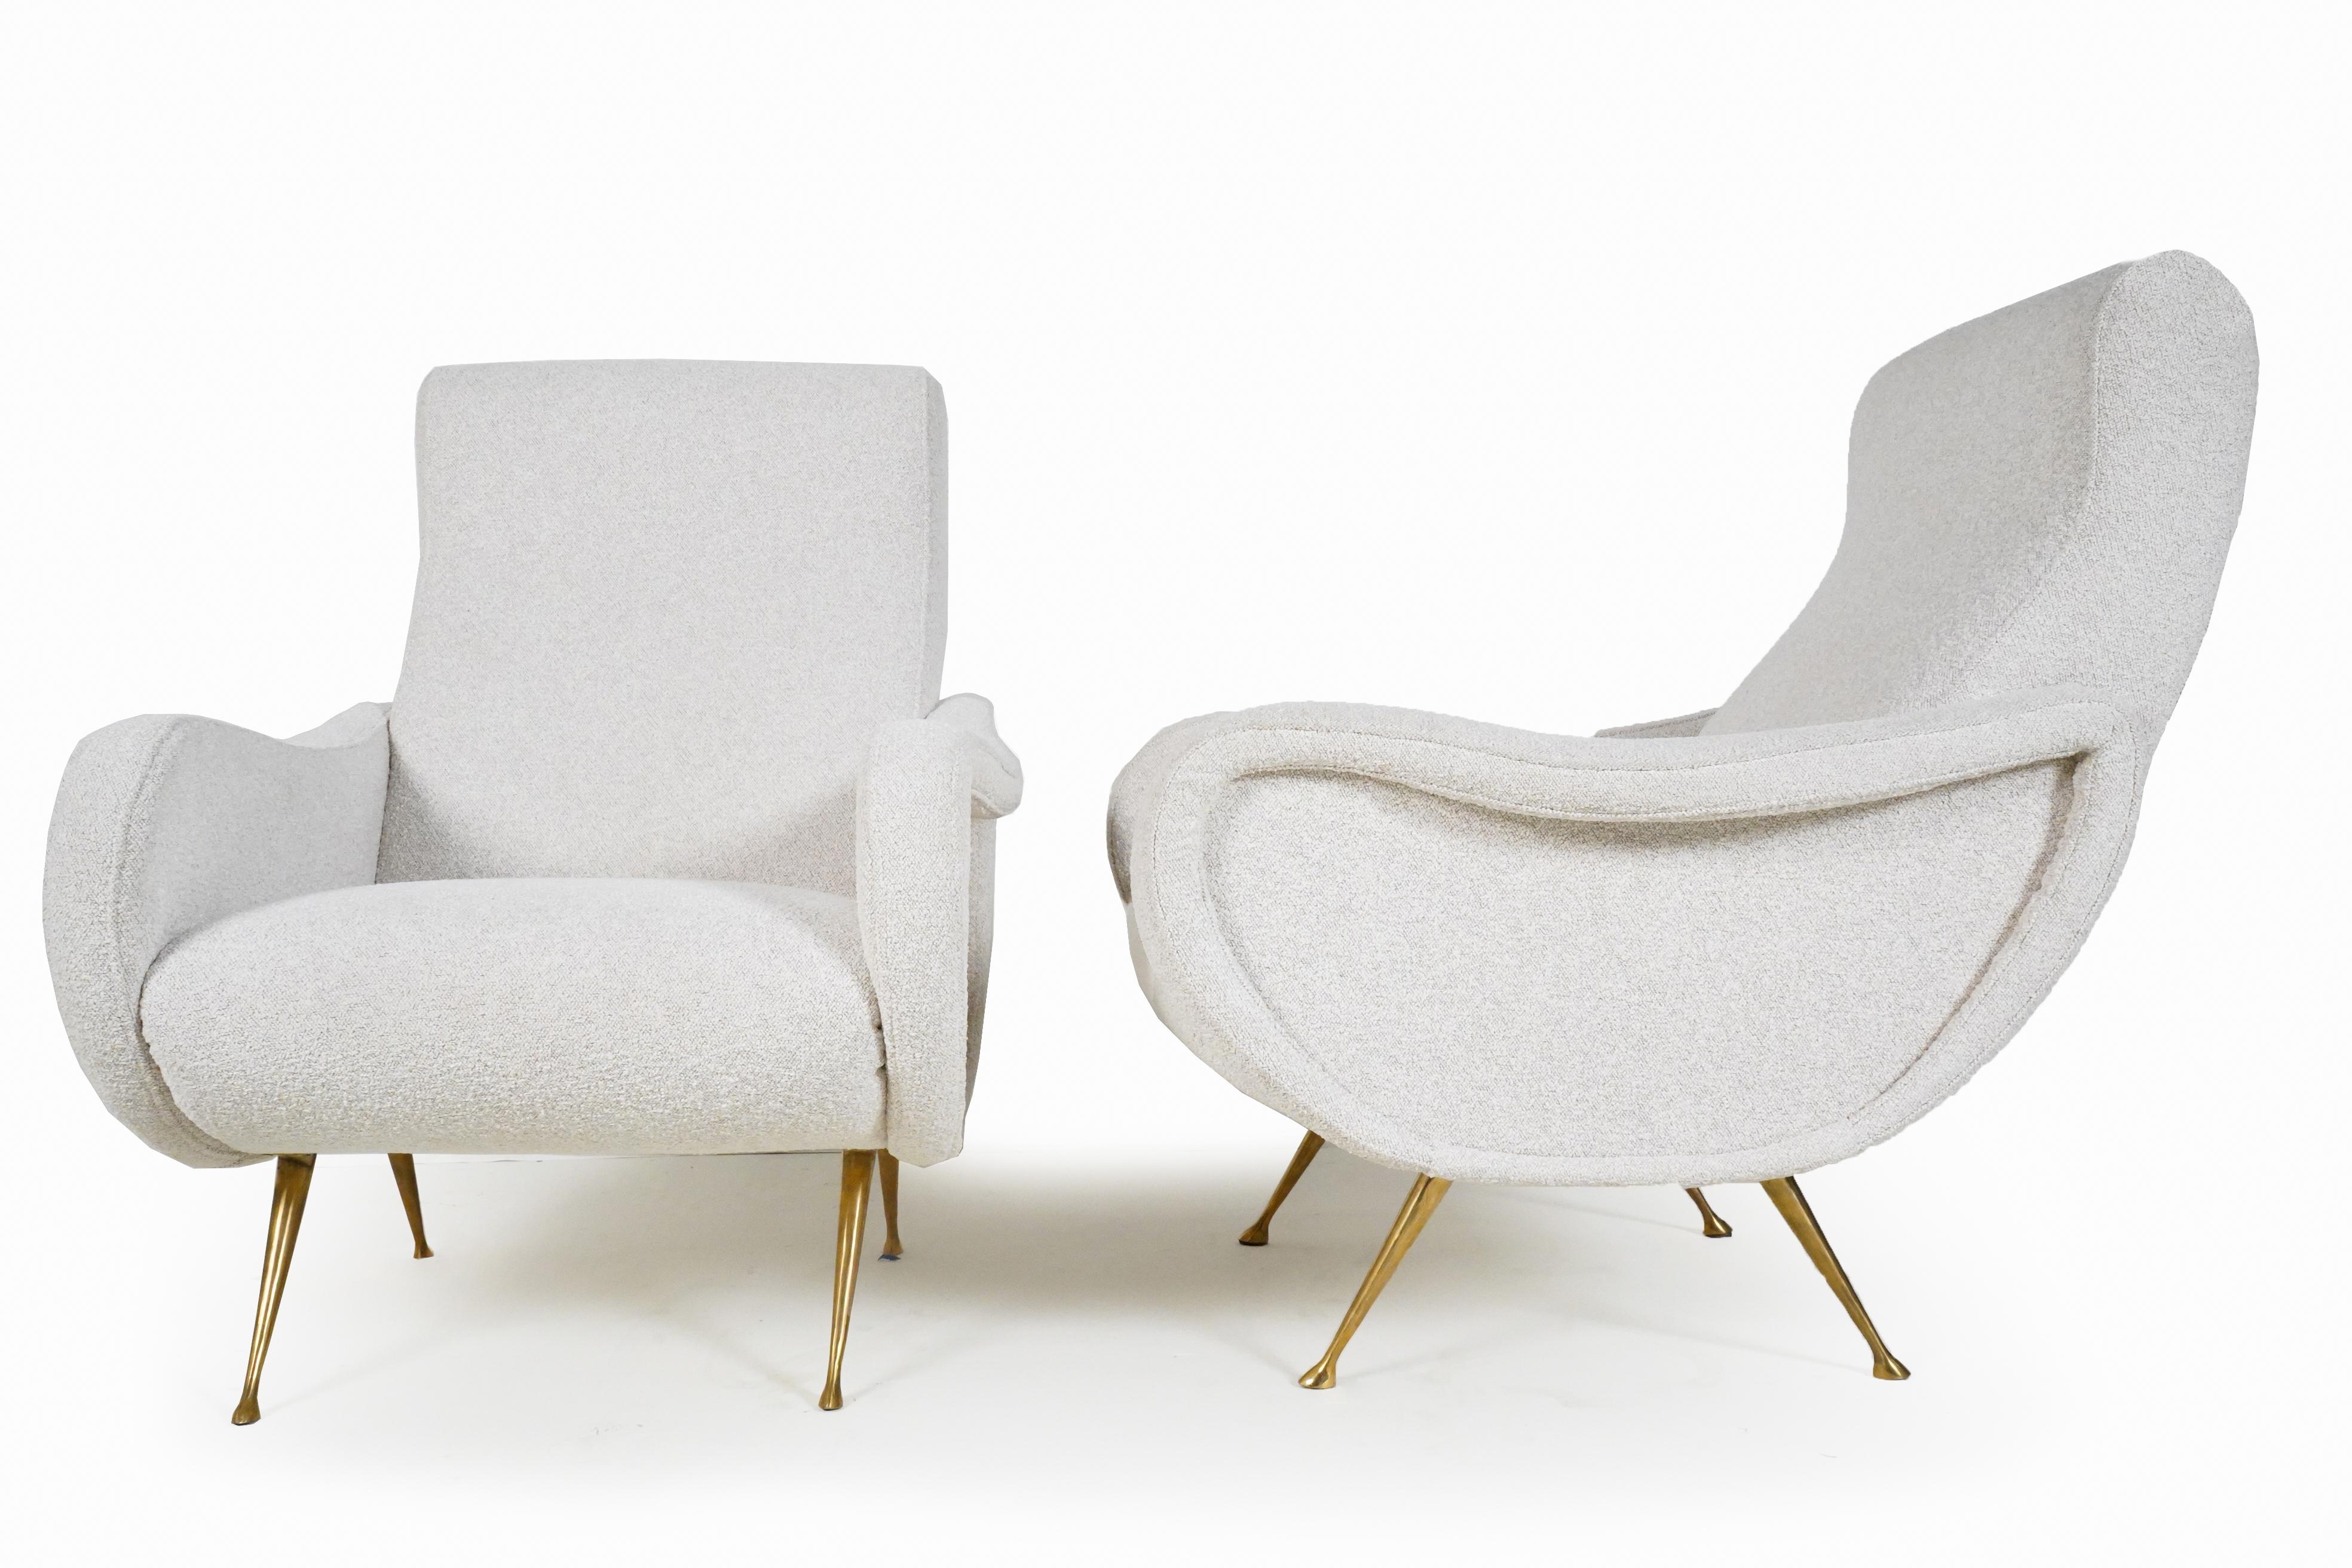 European Pair of Vintage Midcentury Armchairs with Brass Legs and Bouclé Upholstery